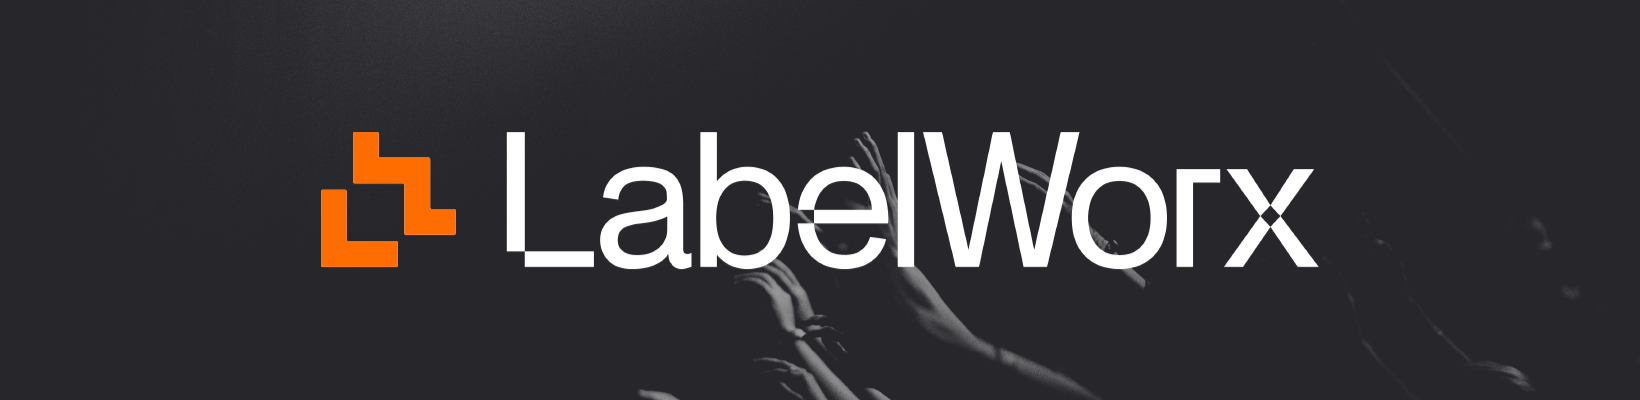 LabelWorx_Logo_Banner_2.png